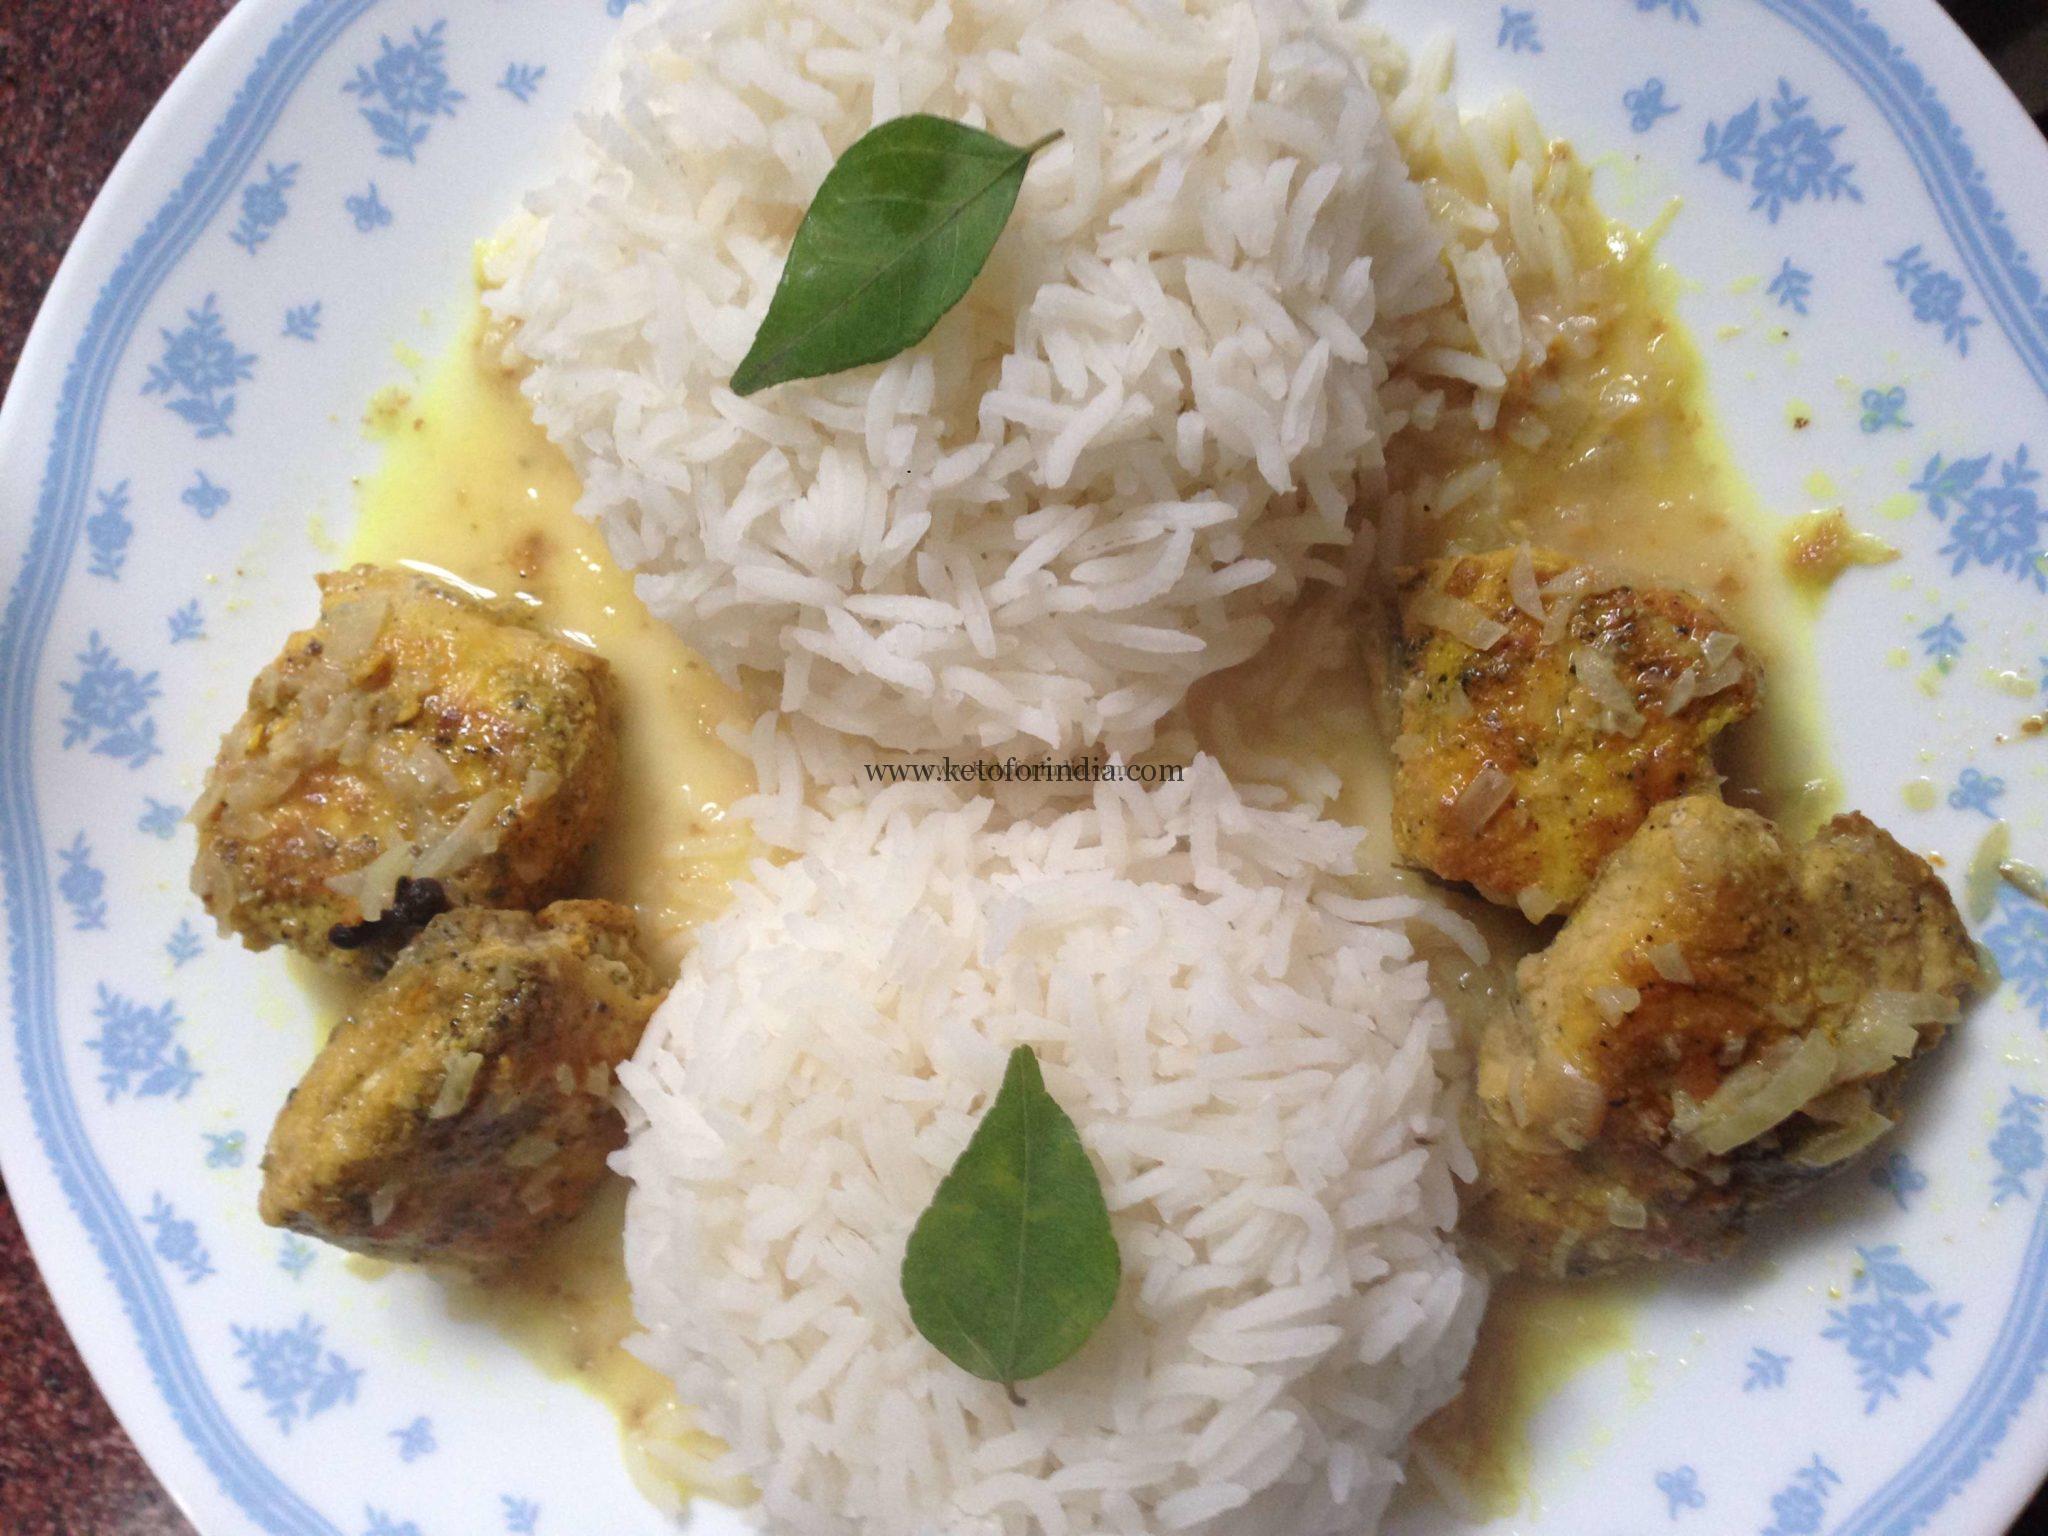 Fish molly with rice